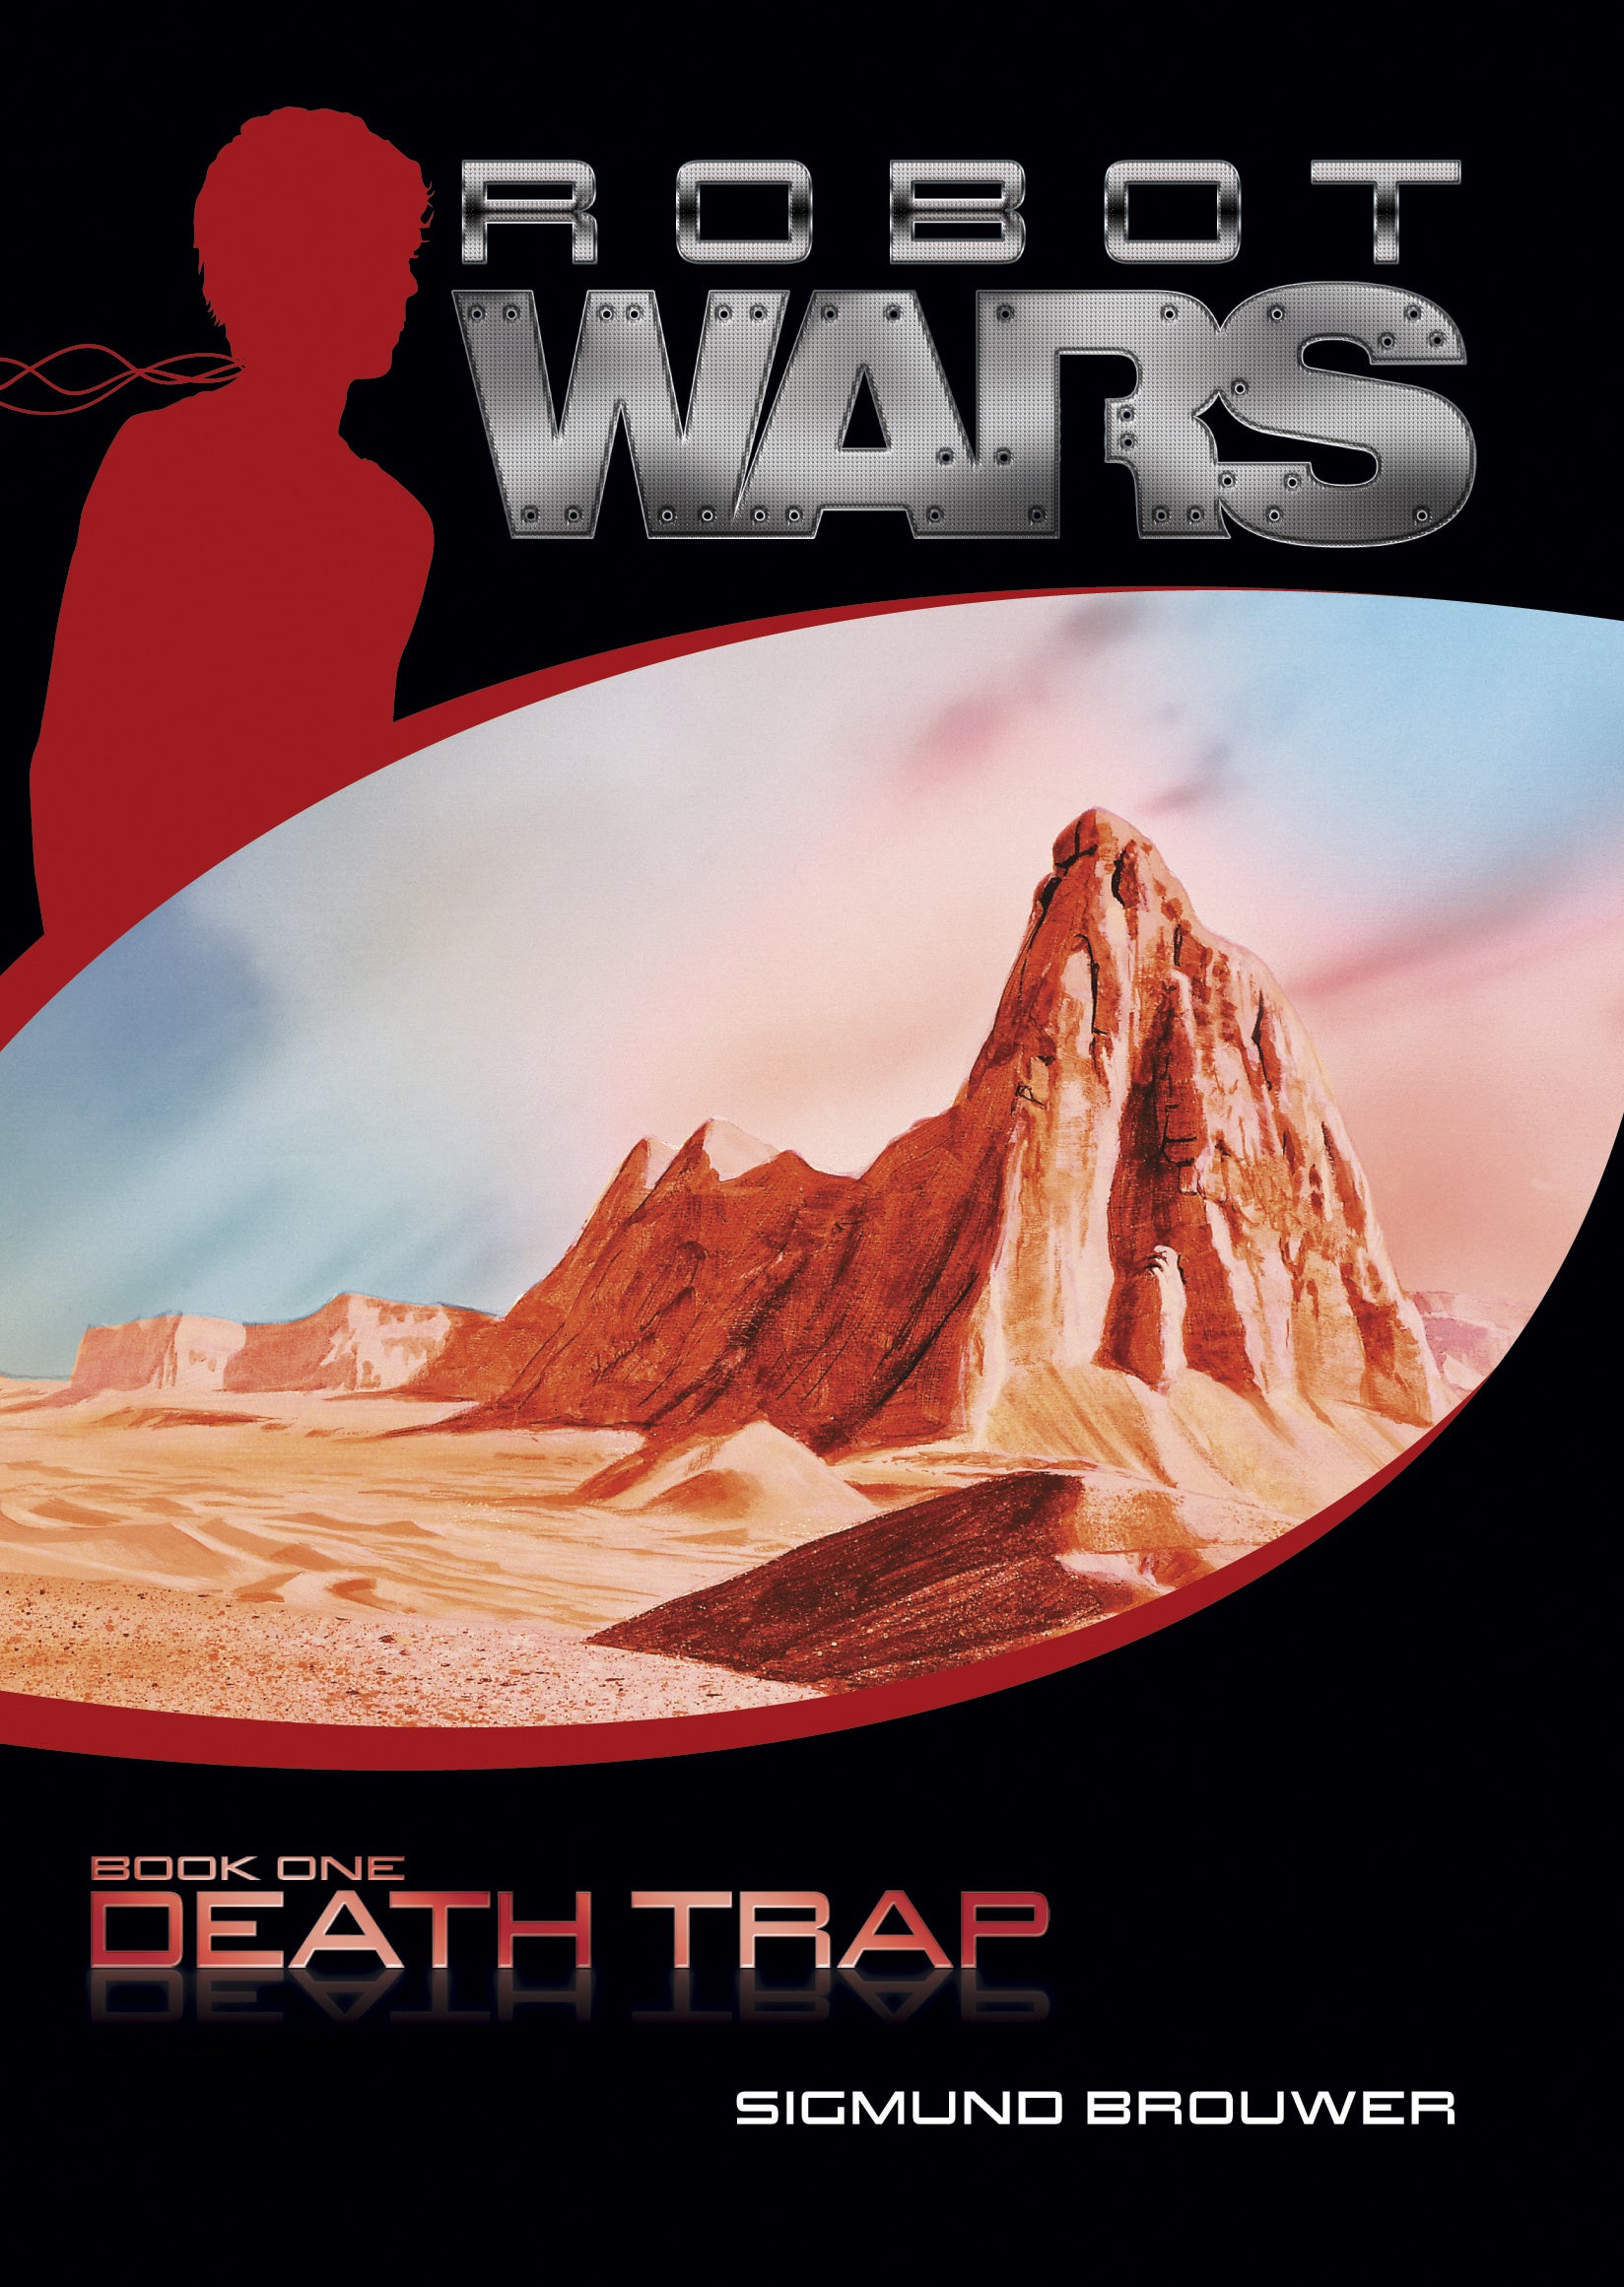 Image of Death Trap other